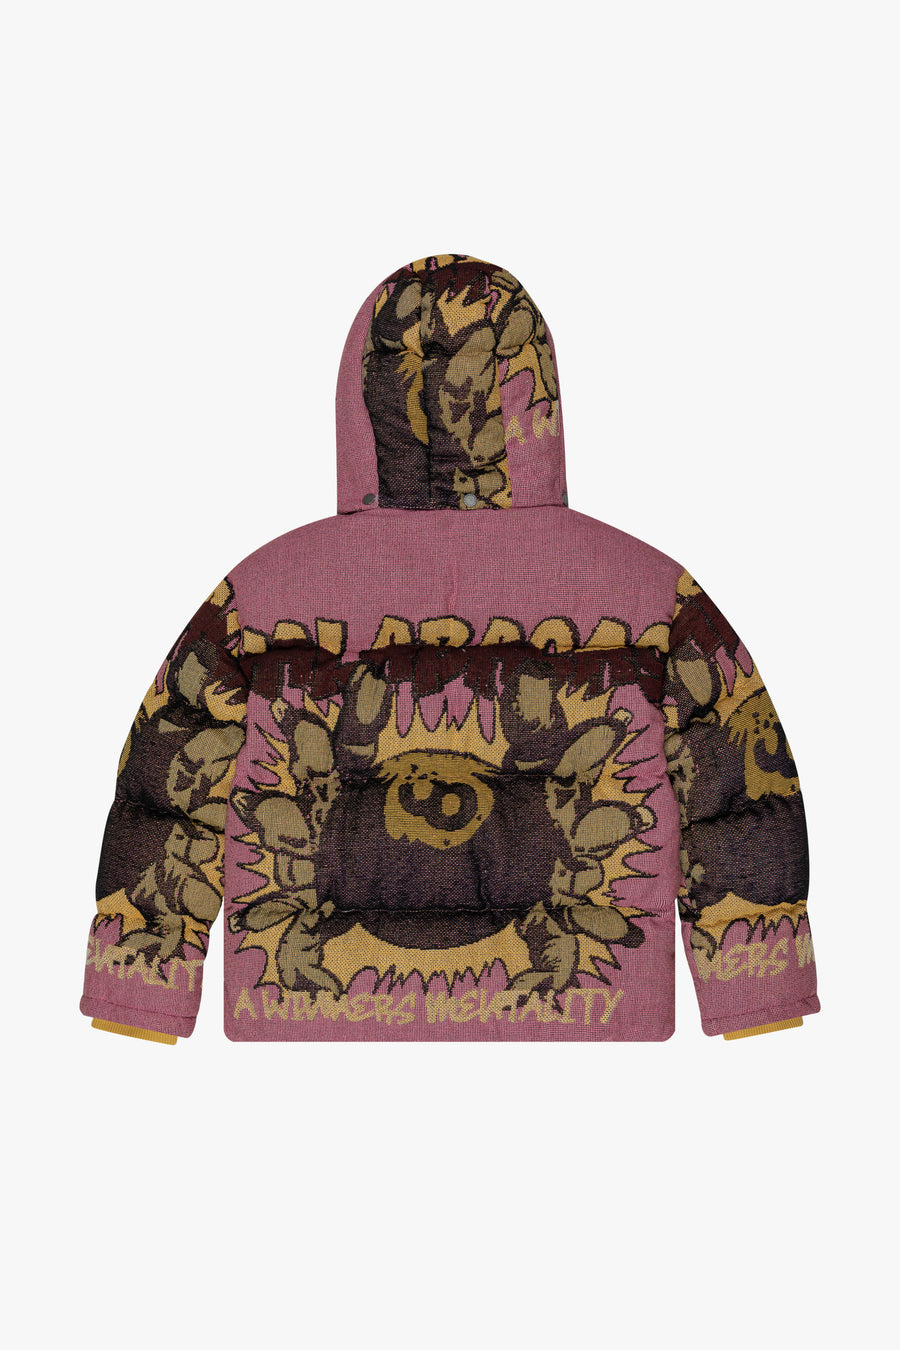 "WINNERS MENTALITY" PINK TAPESTRY PUFFER JACKET